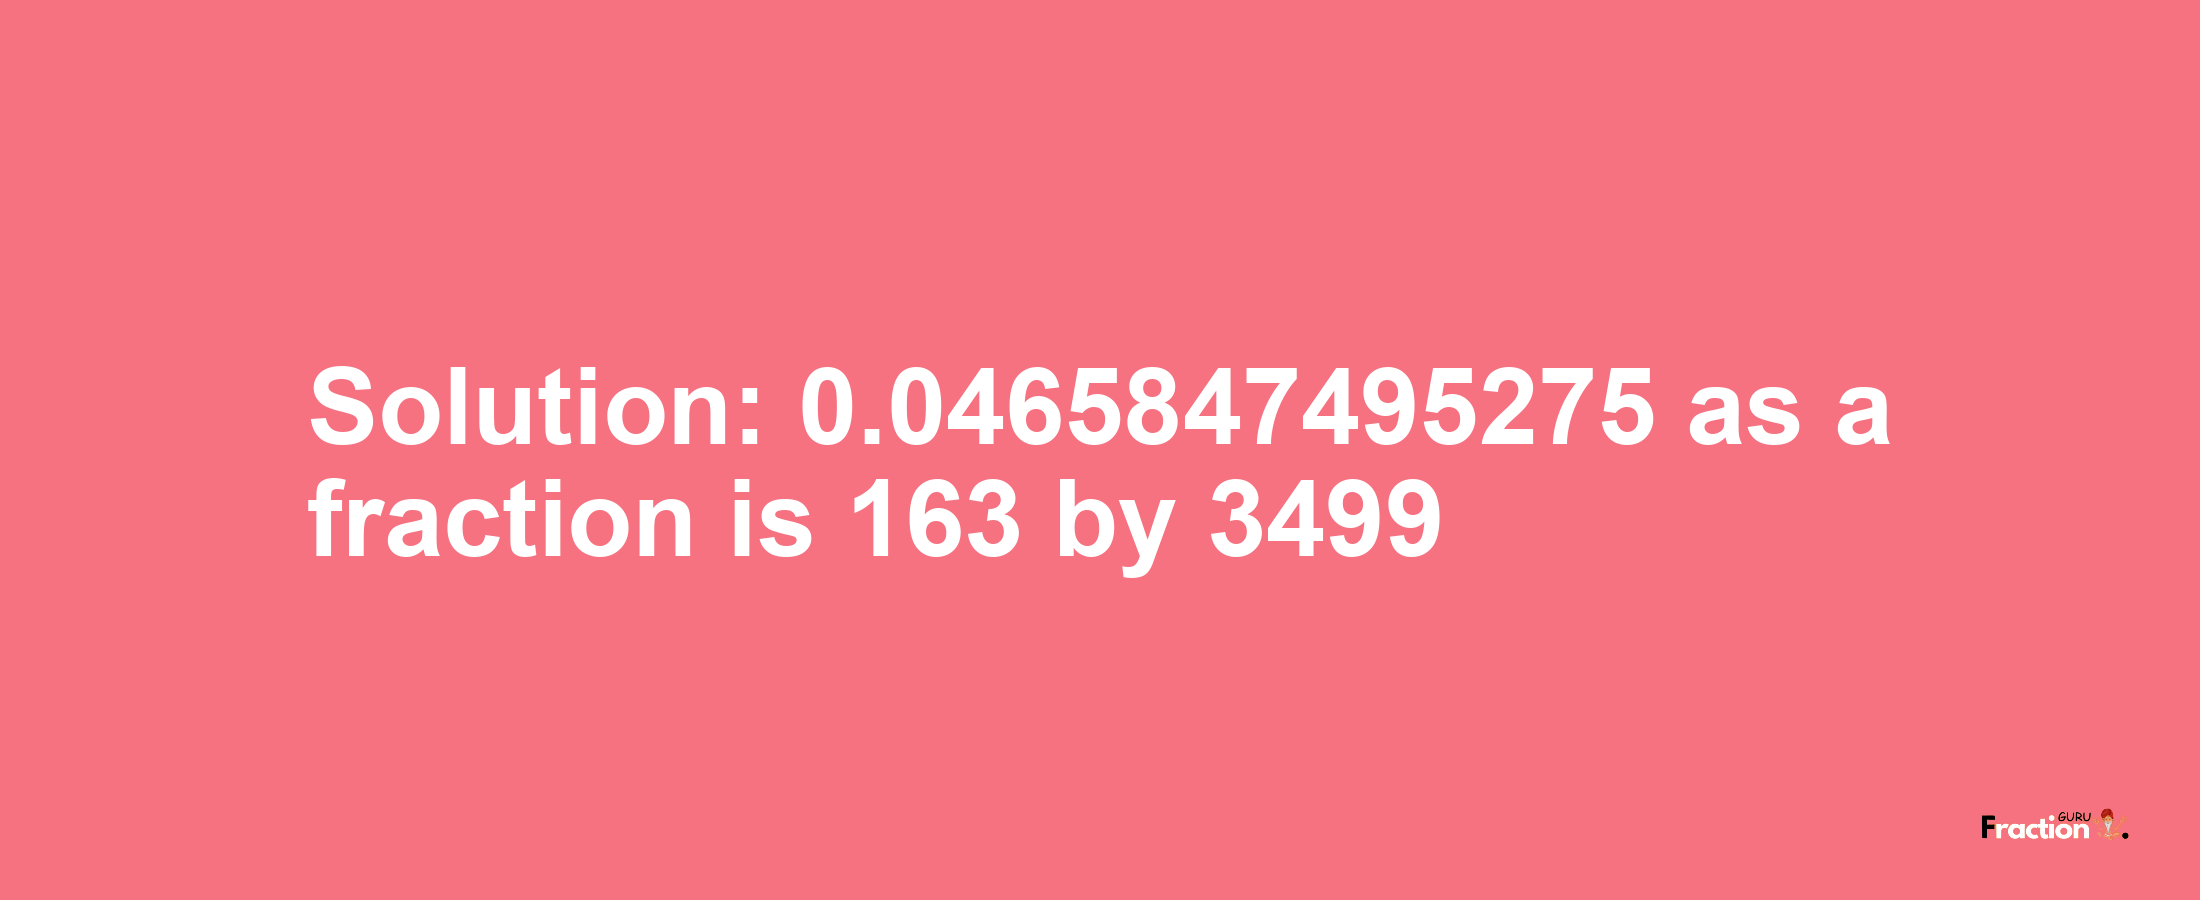 Solution:0.0465847495275 as a fraction is 163/3499